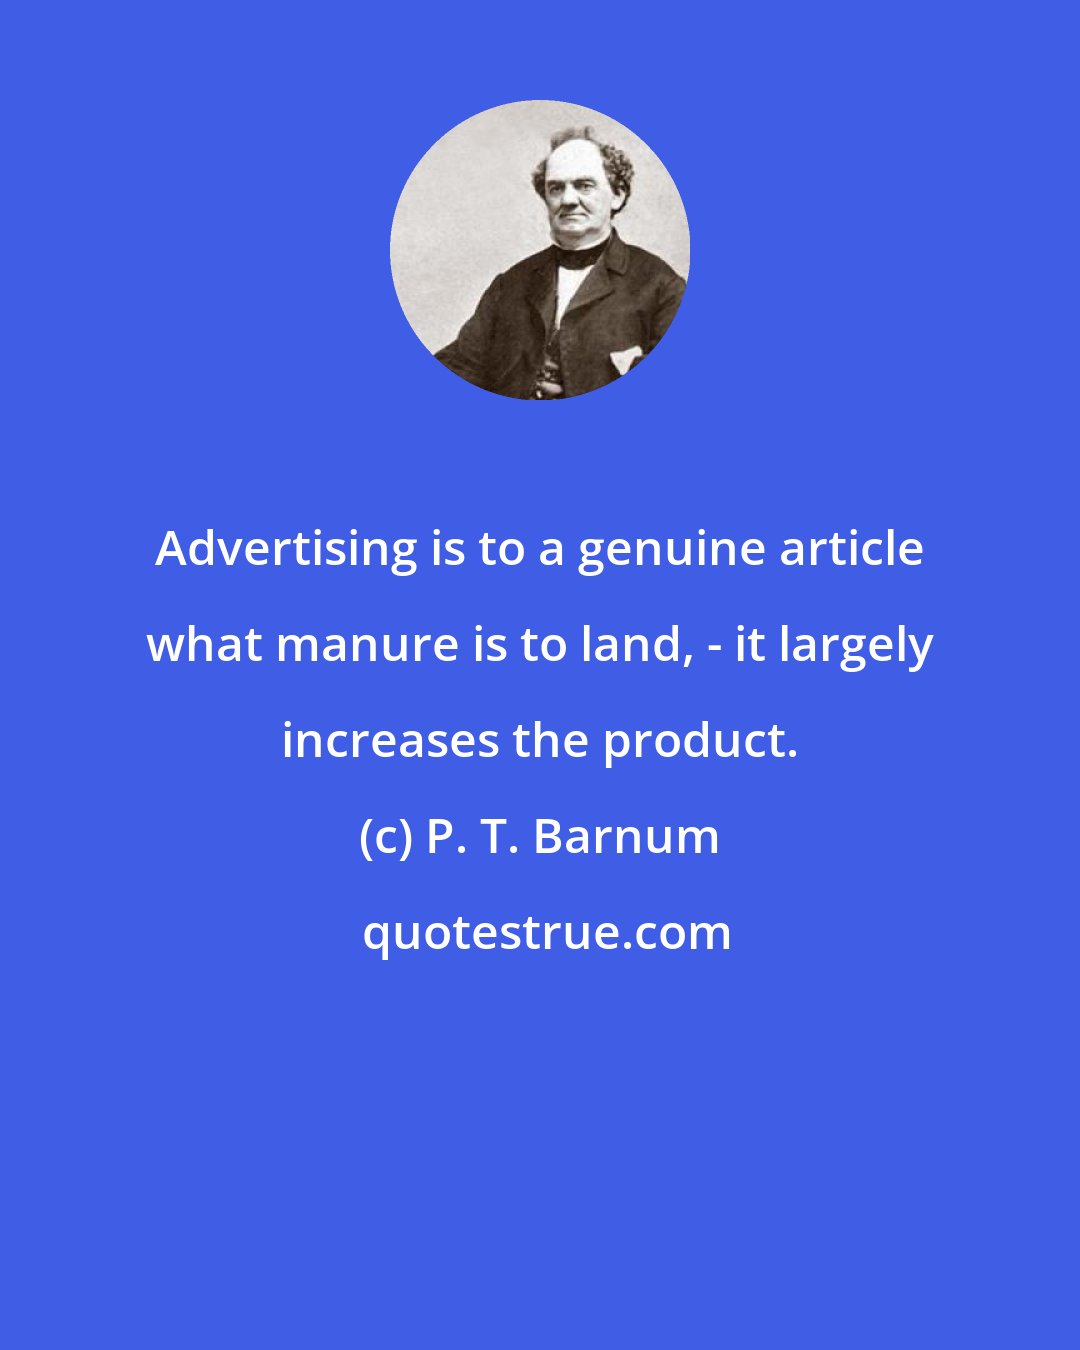 P. T. Barnum: Advertising is to a genuine article what manure is to land, - it largely increases the product.